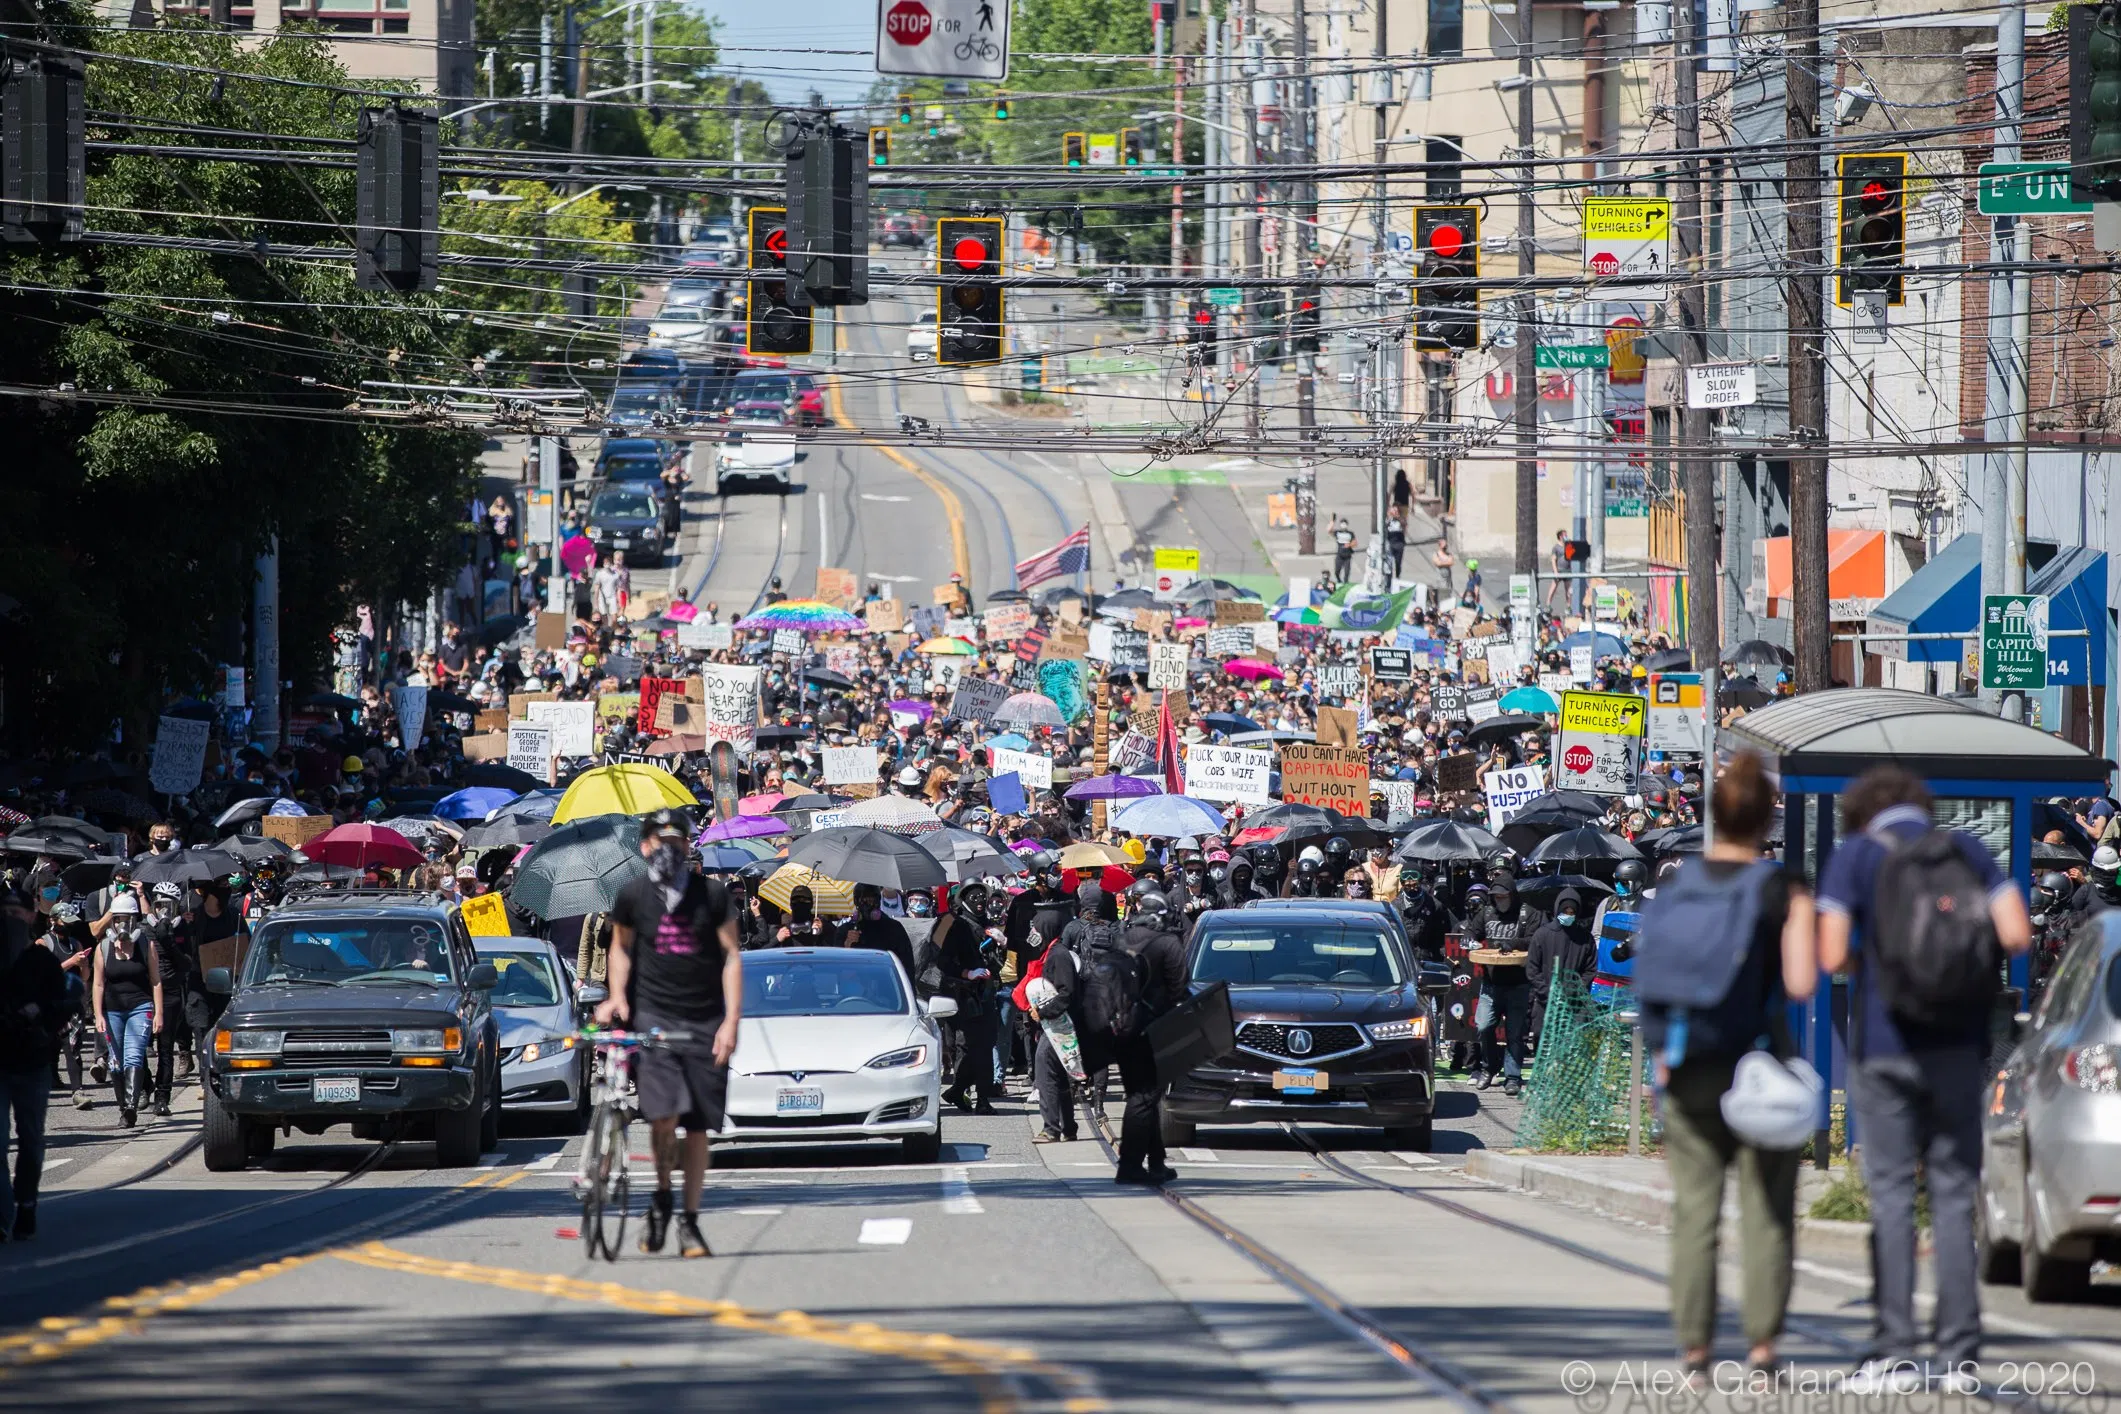 Demonstrations on Capitol Hill, Seattle